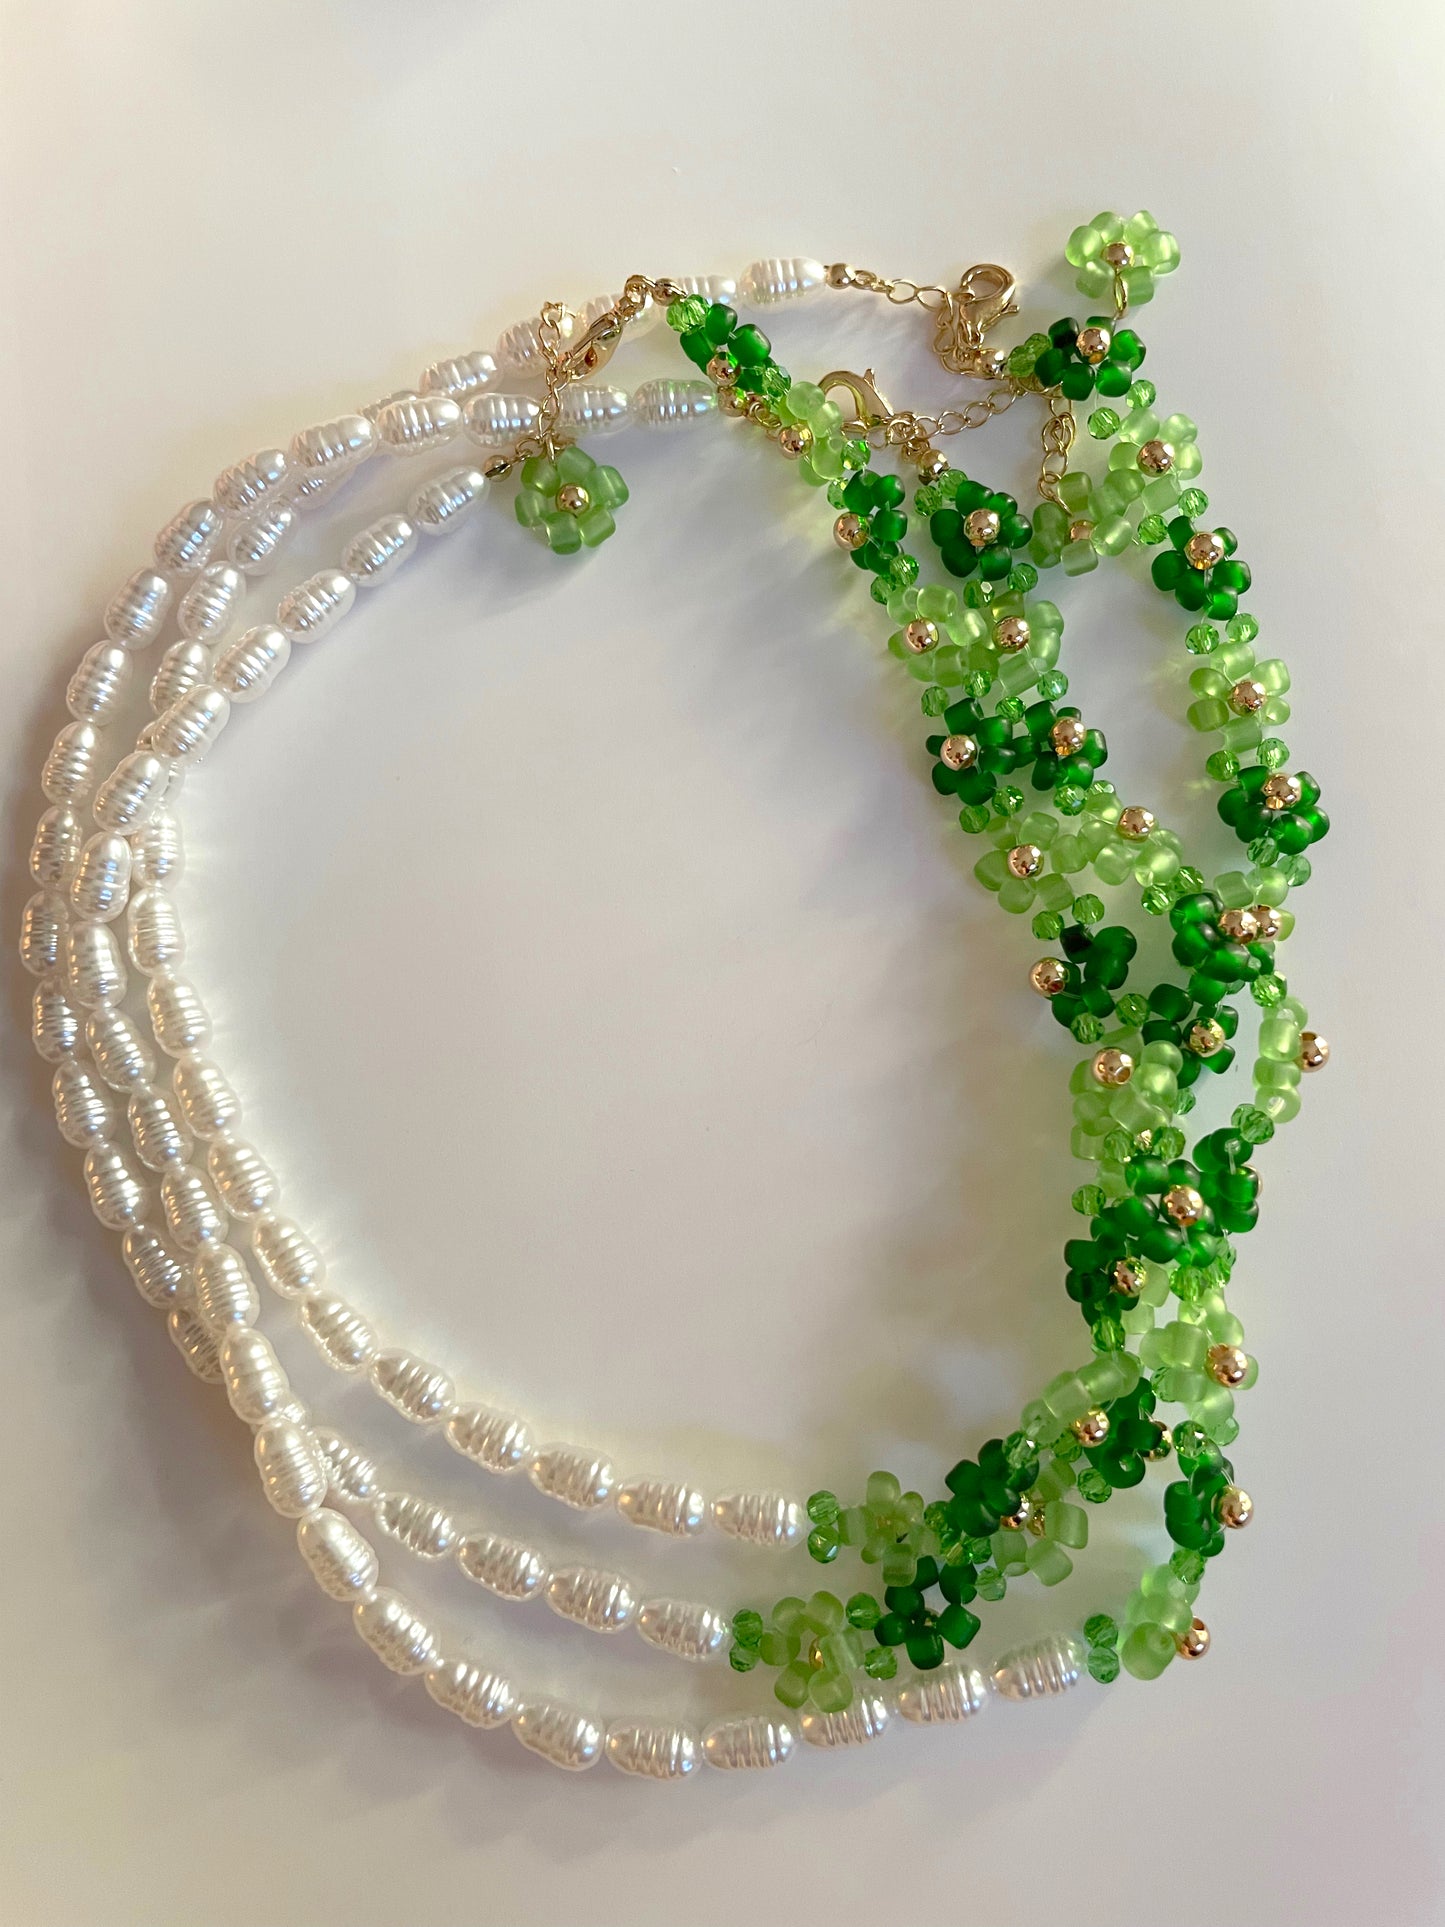 Green flowers and pearls necklace